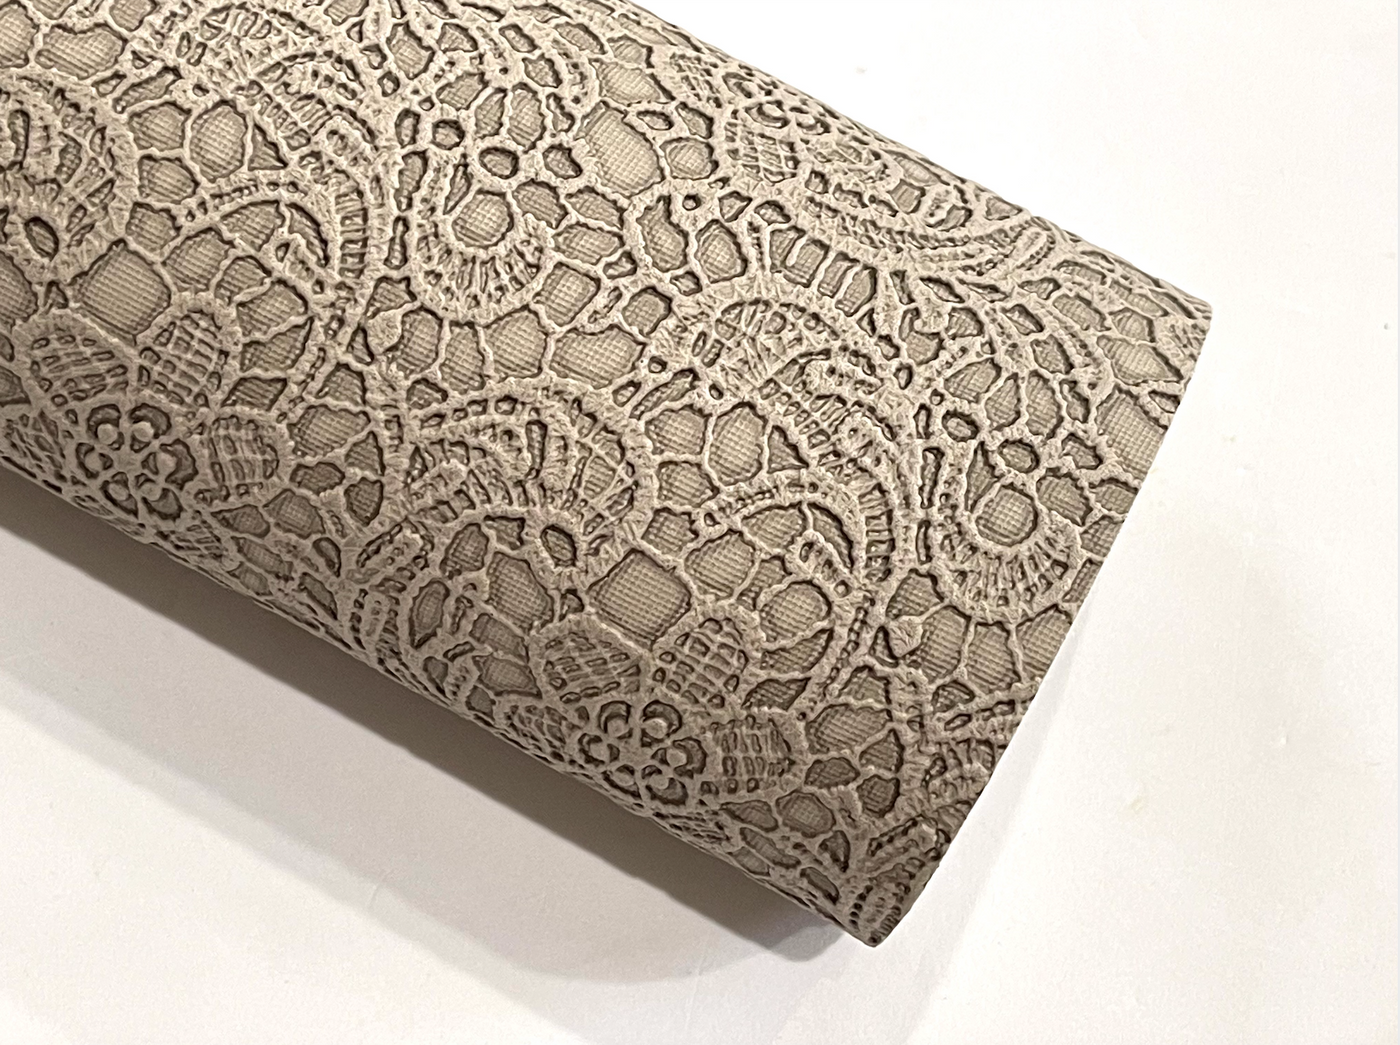 Grecian Floral Lace Embossed Faux Leatherette